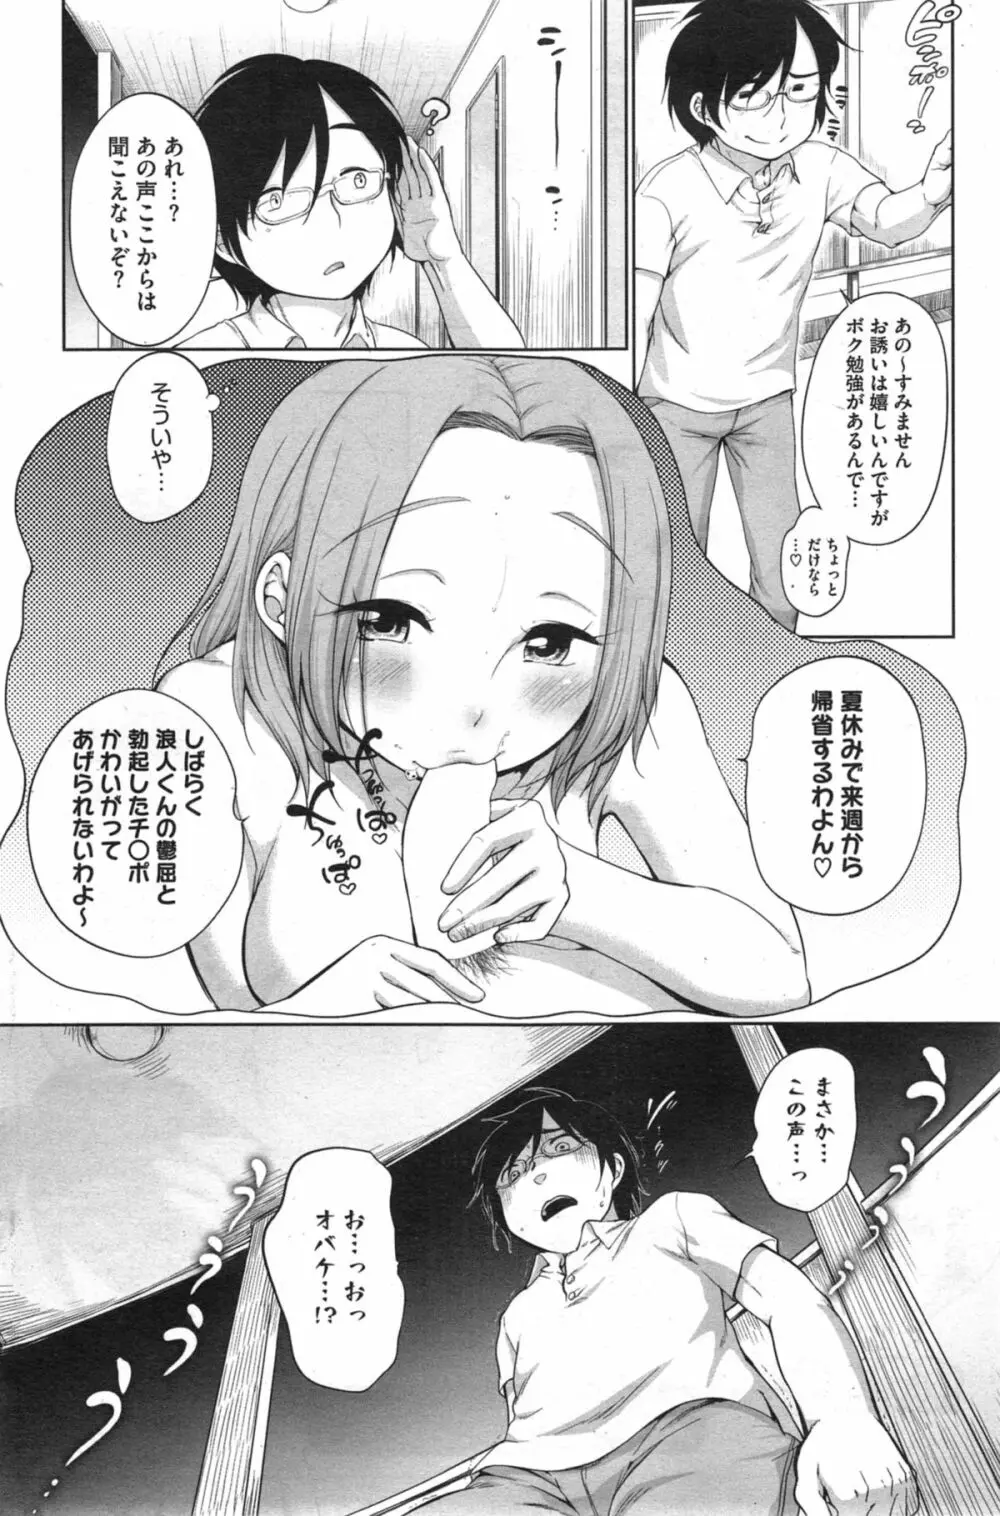 PinkKnock 第1-3章 Page.20